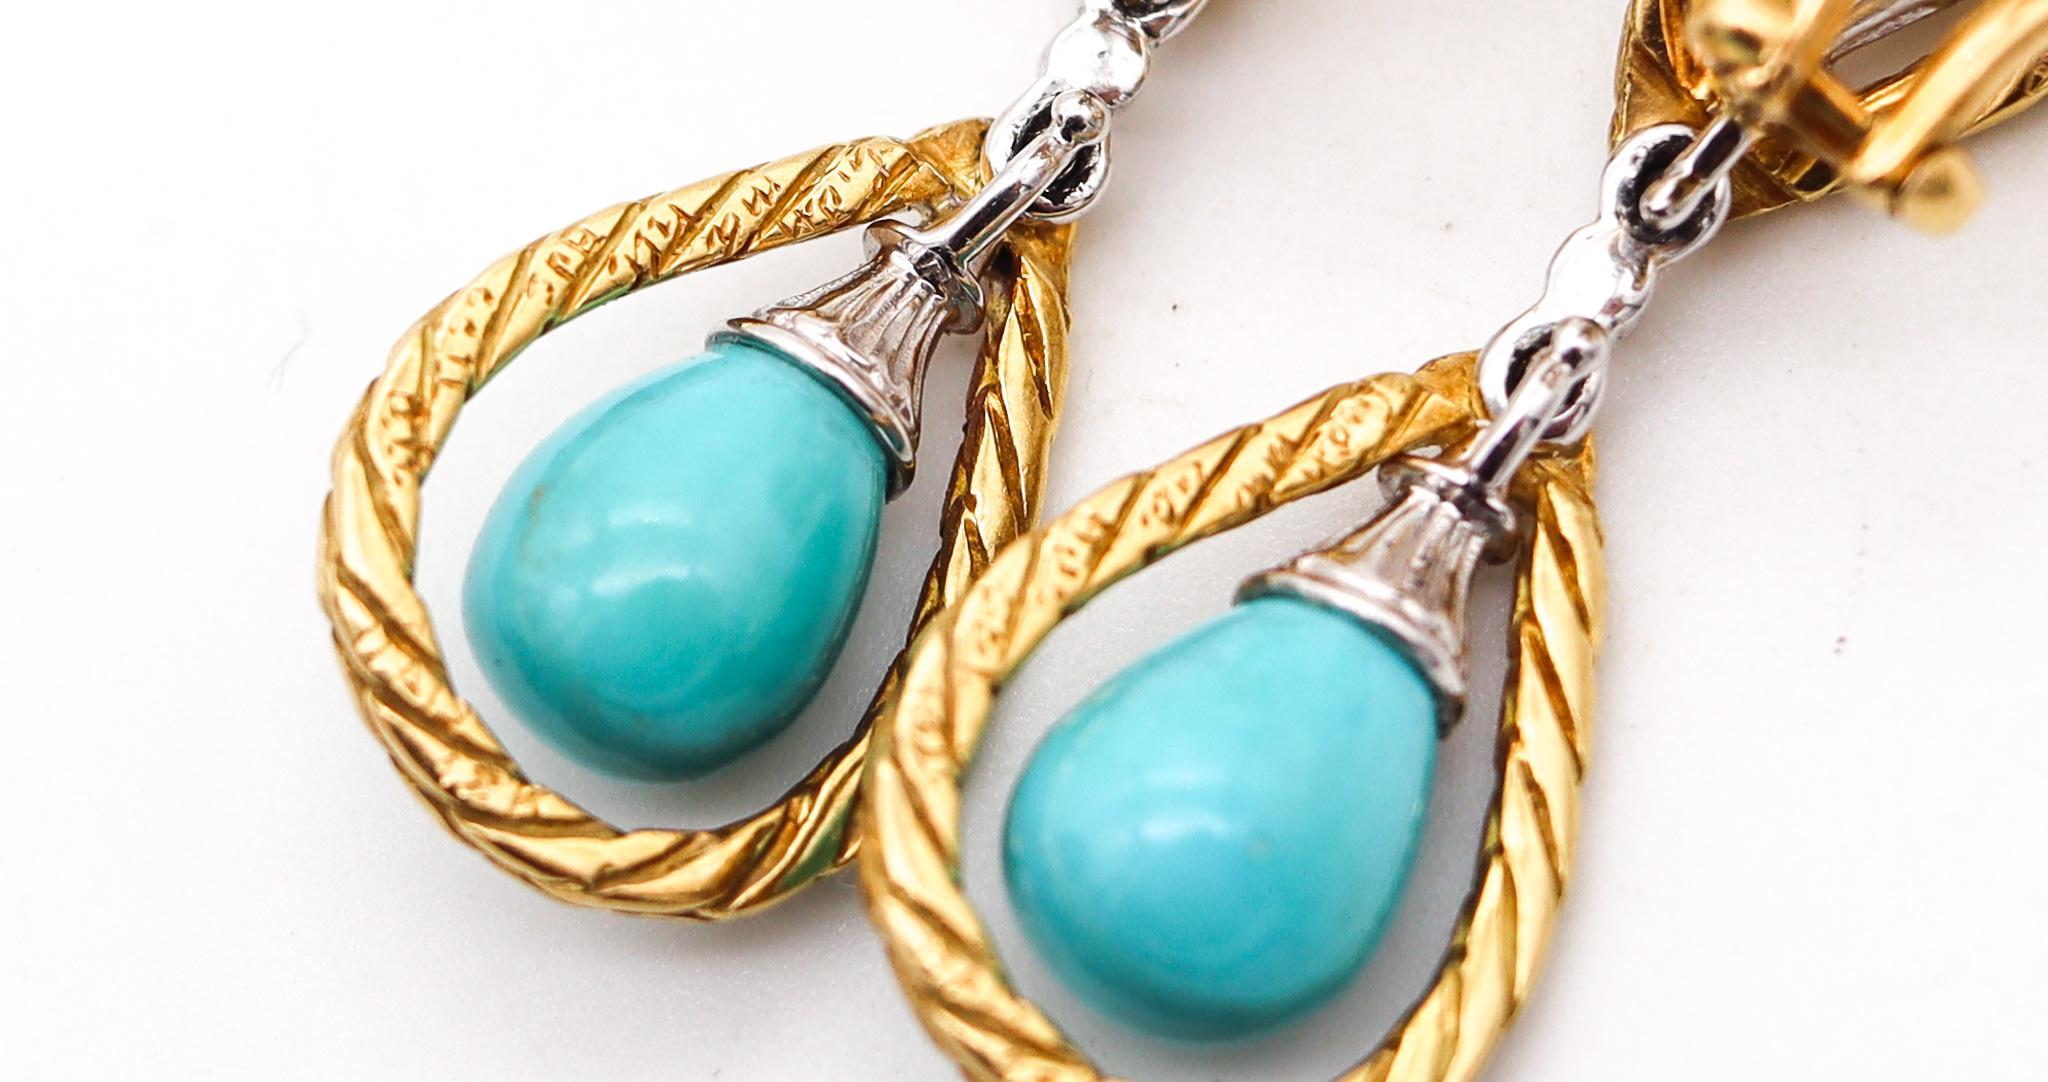 Women's Mario Buccellati 1970 Dangle Earrings In 18Kt Gold With Turquoises and Pearls For Sale